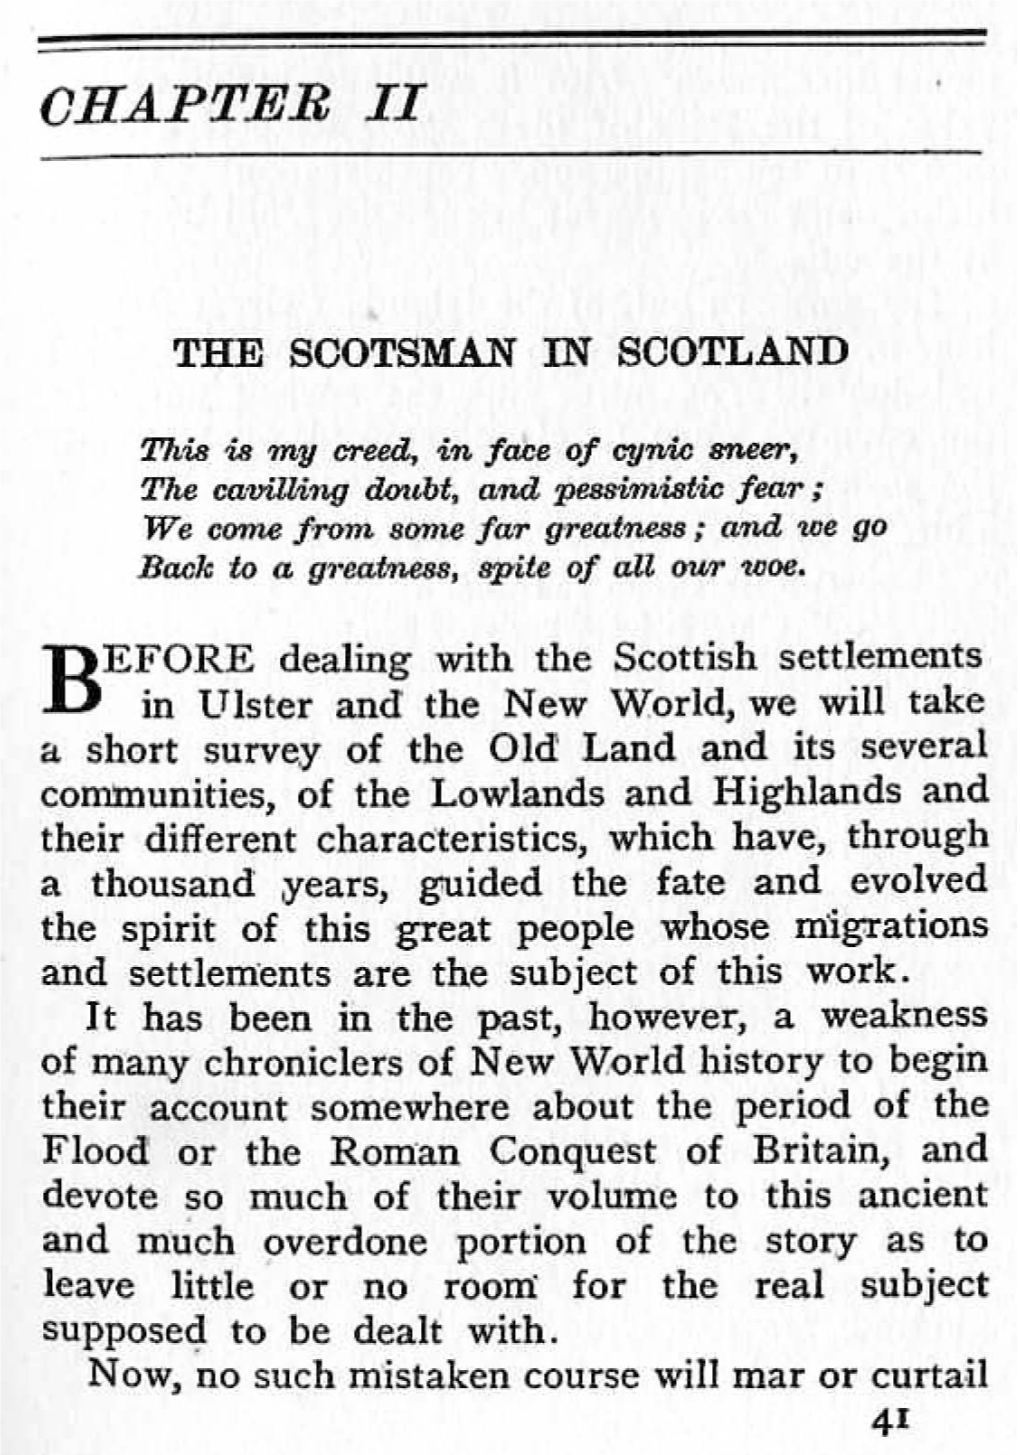 IFORE Dealing with the Scottish Settlements B" in Ulster and the New World, We Will Take Communities, of the Lowlands and H